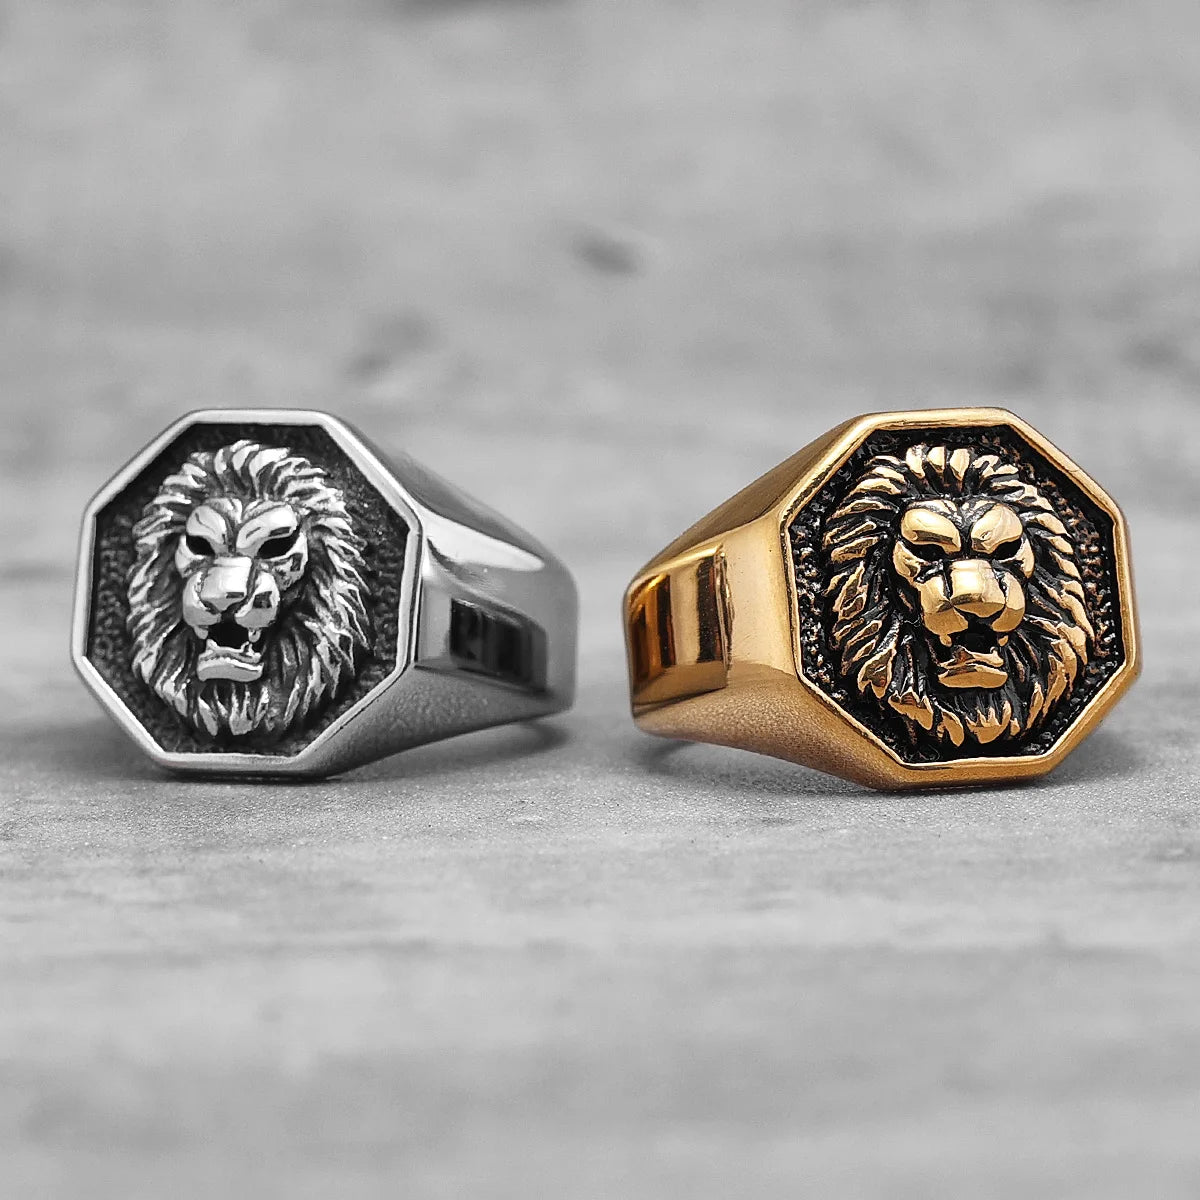 Lion Stainless Steel Rings for Men - Unique Punk Trendy Jewelry Gift Men's Rings